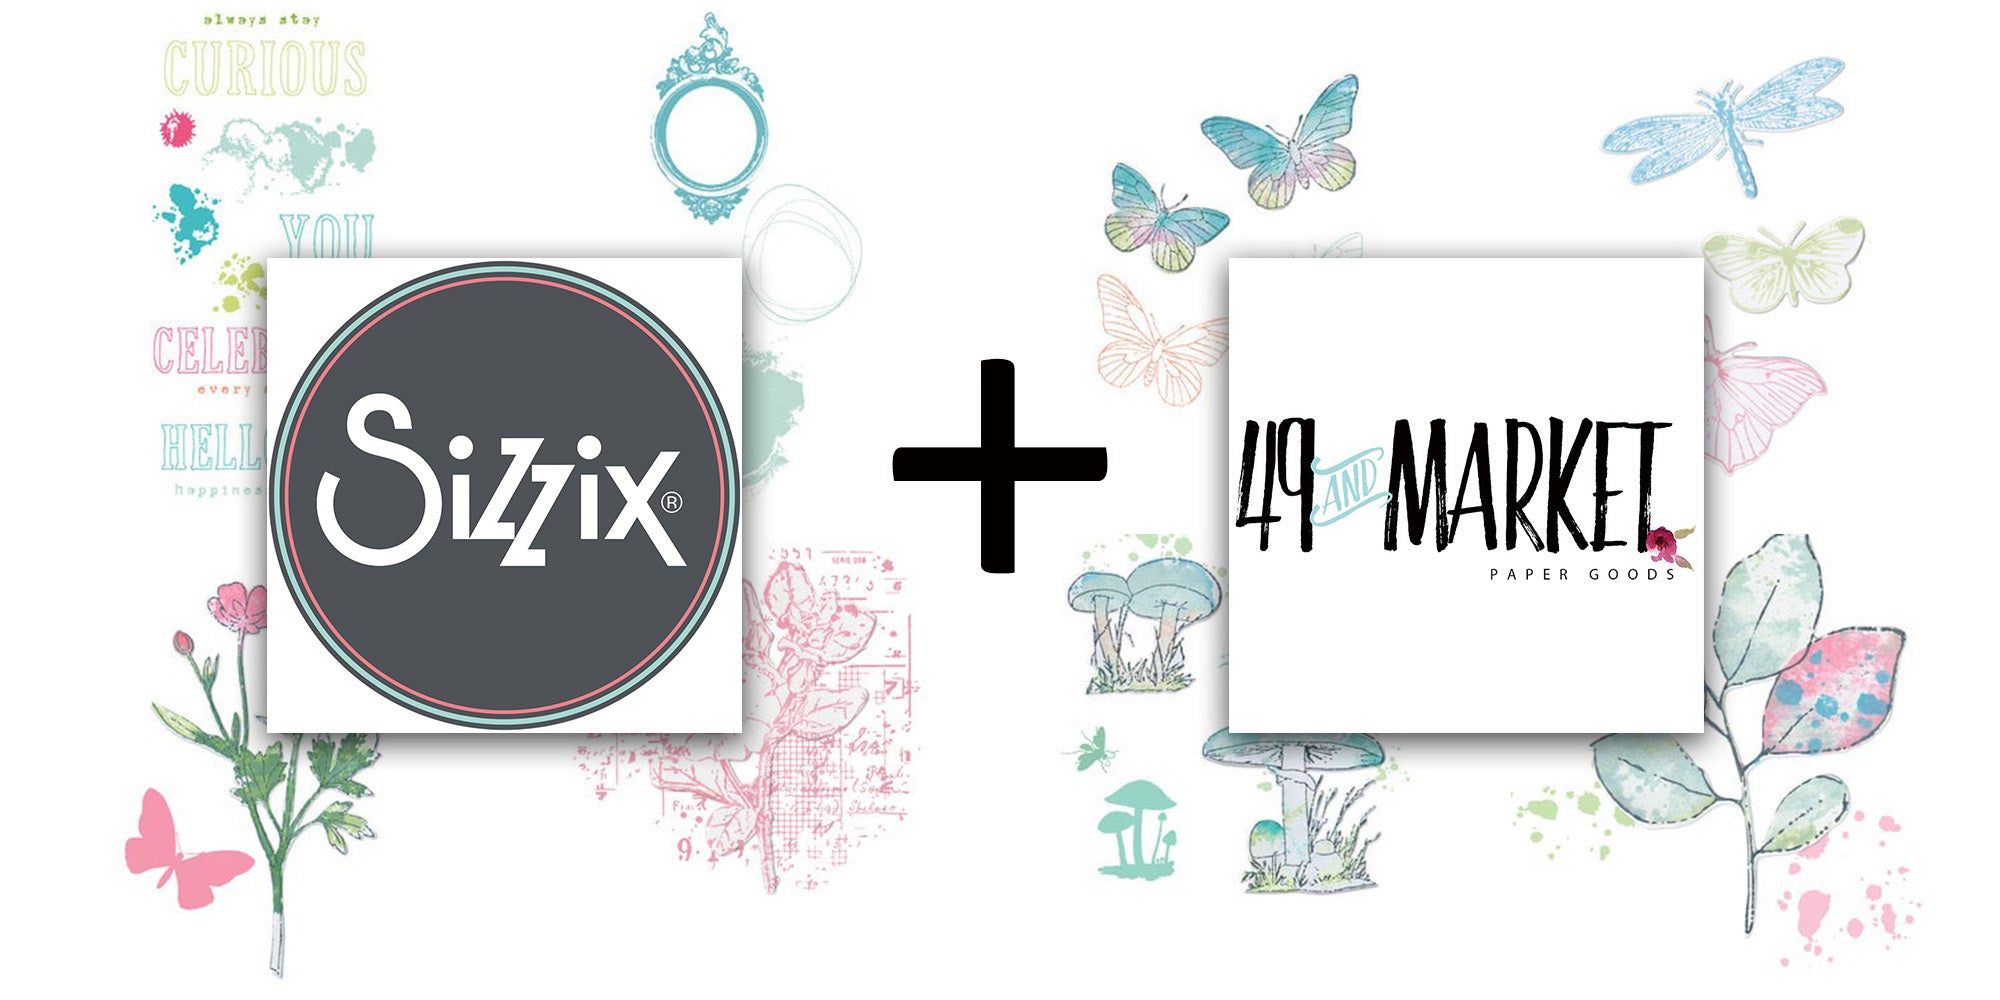 49 and Market/Sizzix Co-branded Products